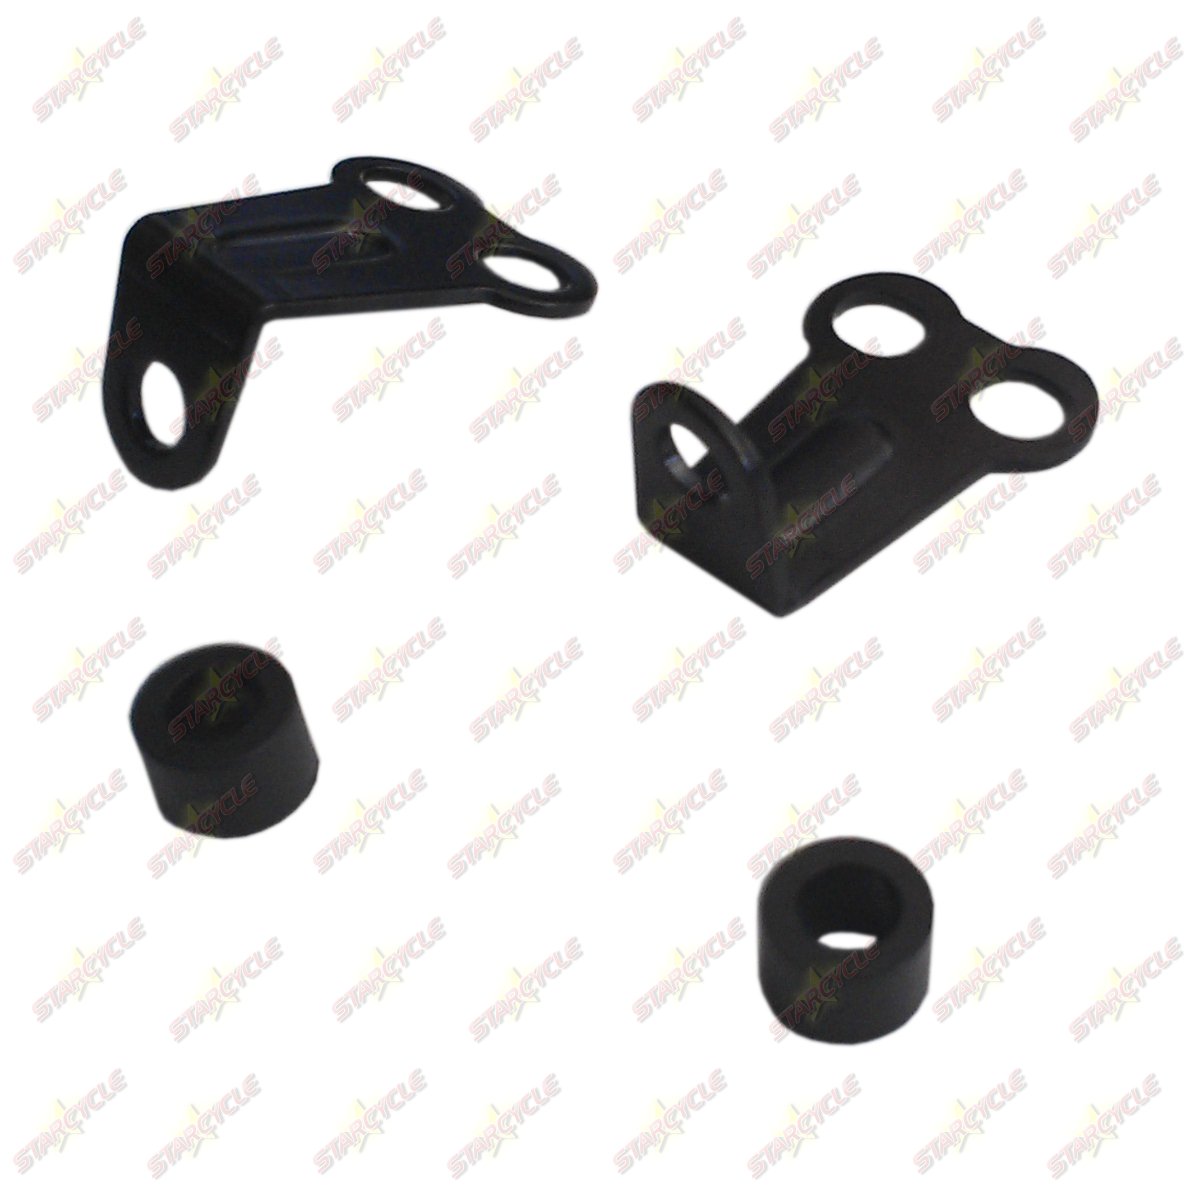 DRC Motorcycle Front Blinker Holders - For 8mm Bolts w/ 20mm Spacing - Black - Click Image to Close